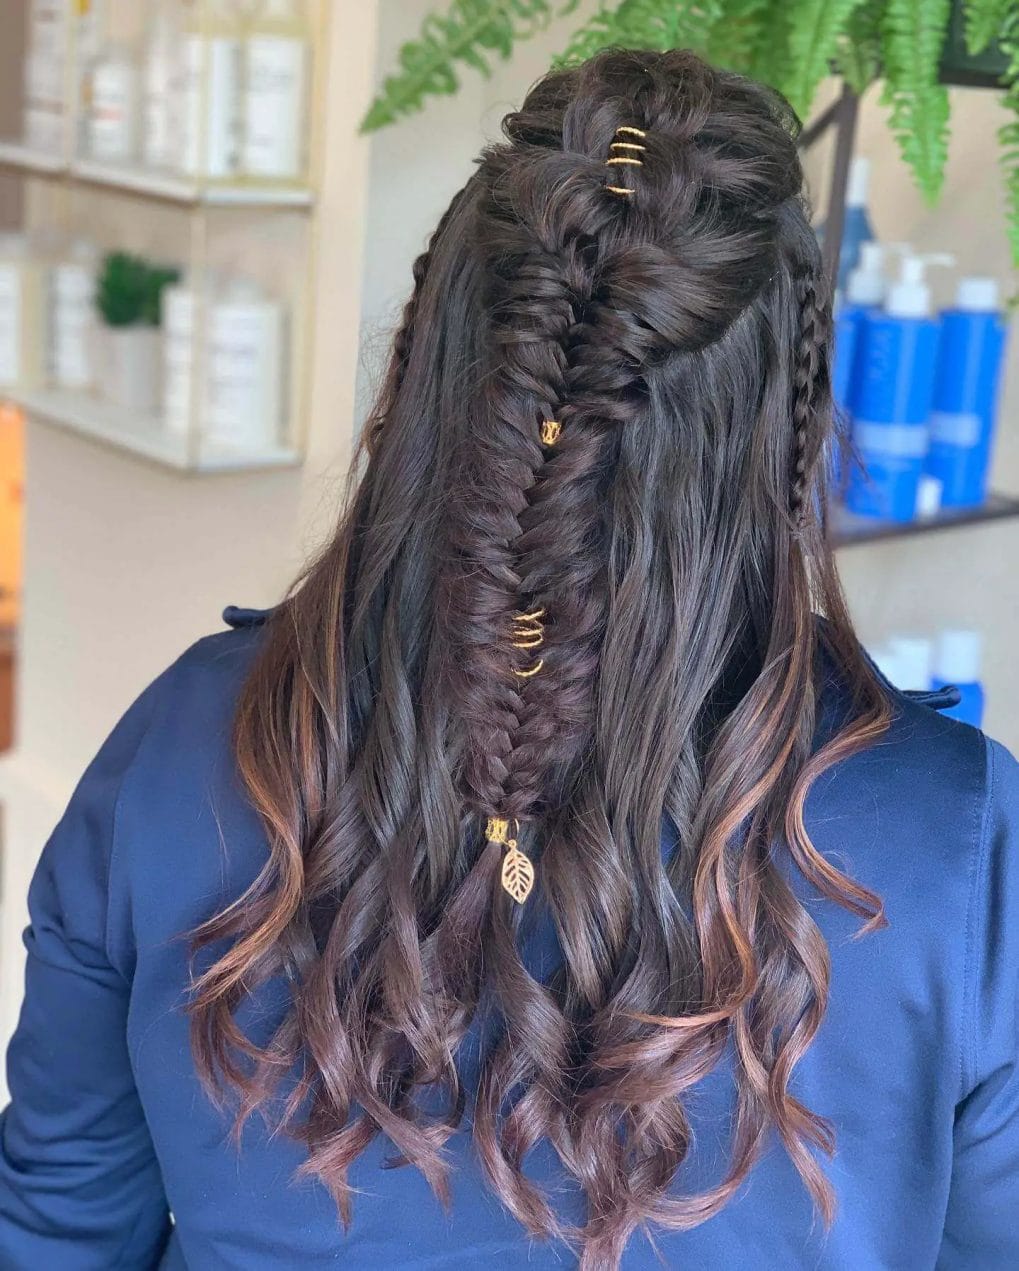 Luxurious brunette half-up style with a central Viking braid and golden charms.